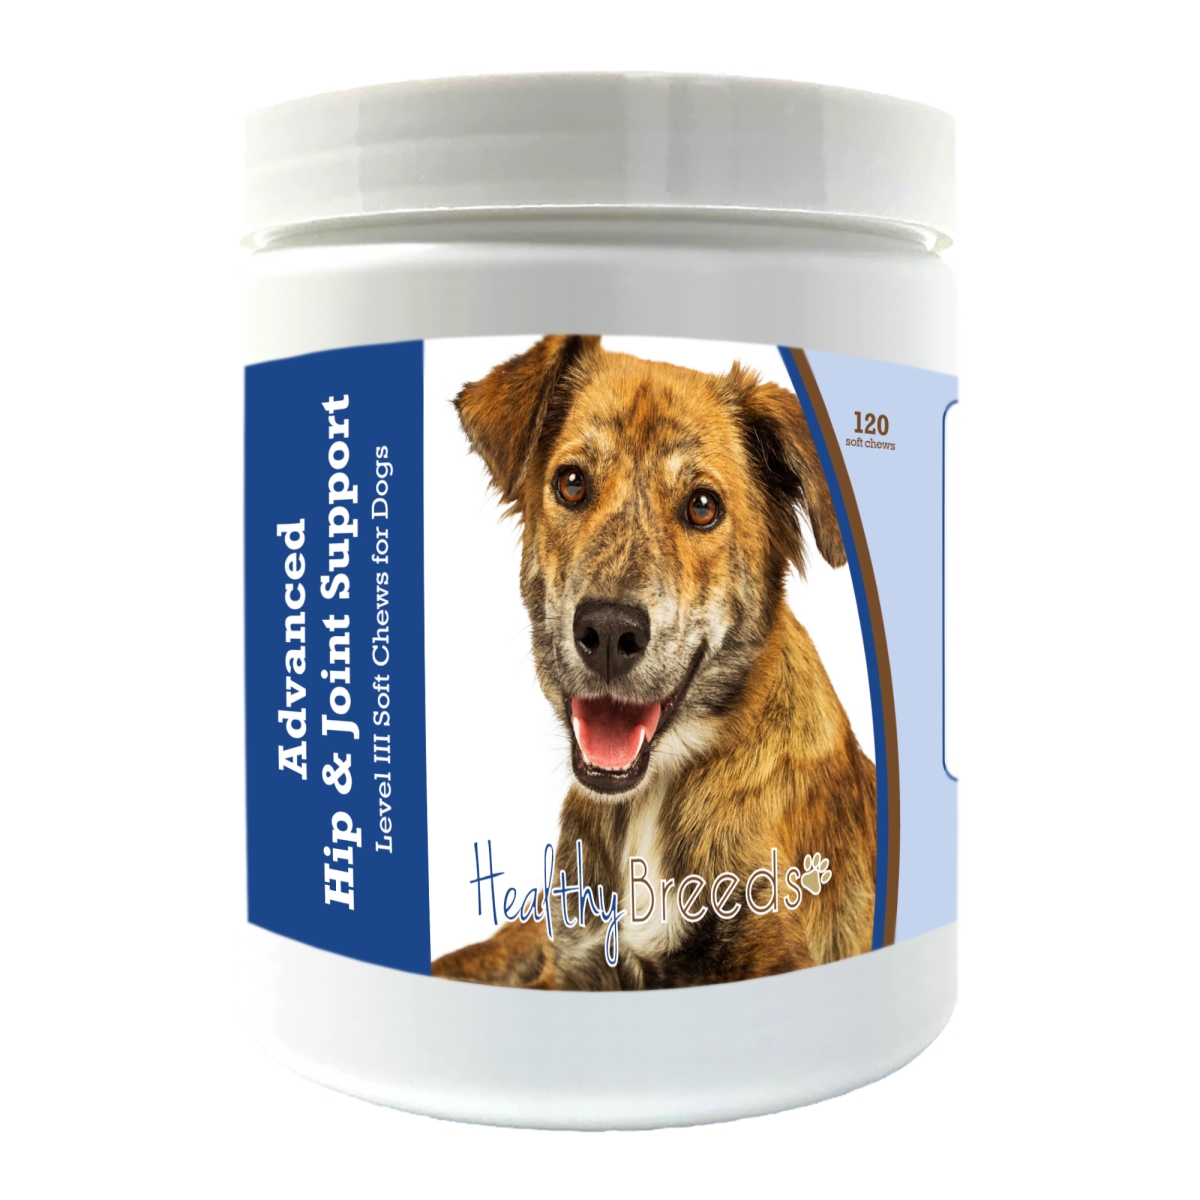 Picture of Healthy Breeds 192959898934 Plott Advanced Hip & Joint Support Level III Soft Chews for Dogs